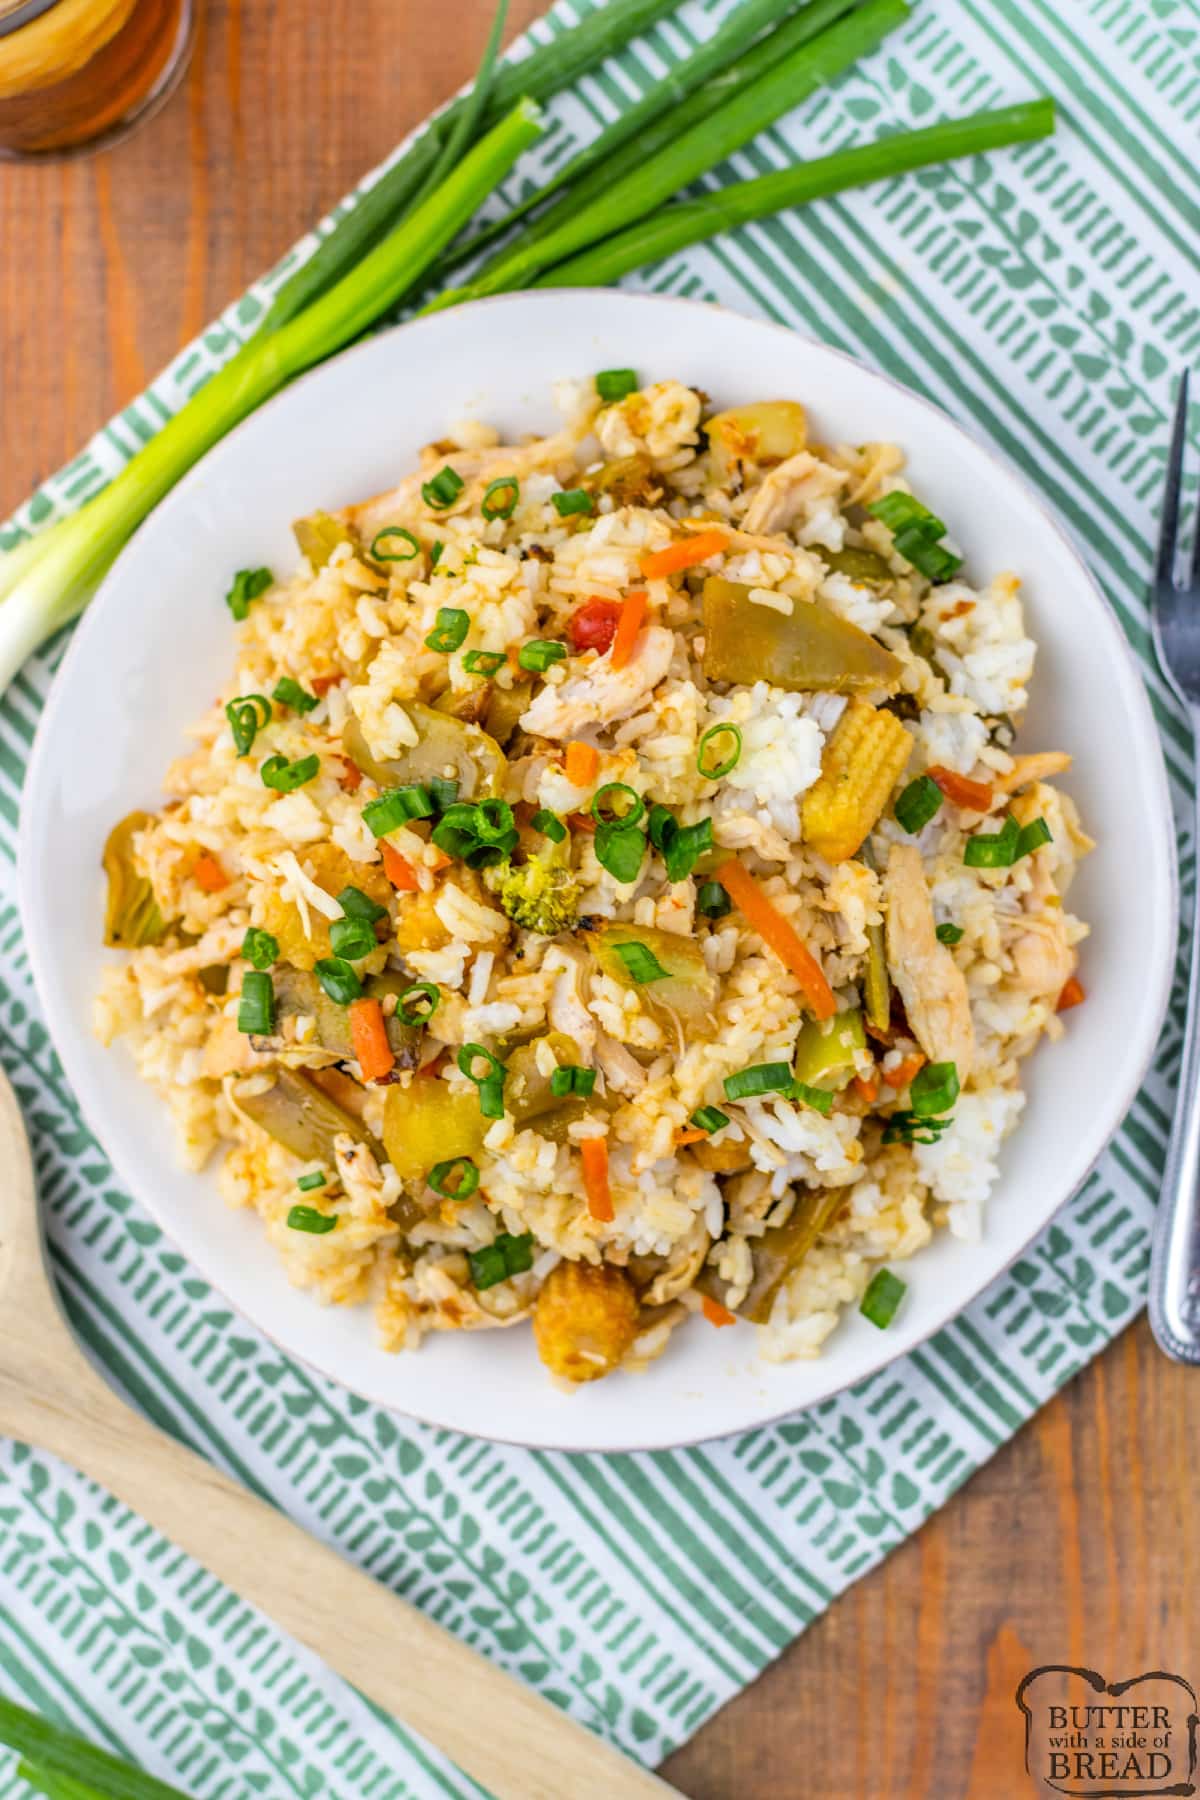 Chicken Teriyaki Casserole is an easy and delicious weeknight dinner recipe. This simple casserole recipe is made with rice, chicken, vegetables, and a homemade teriyaki sauce. 